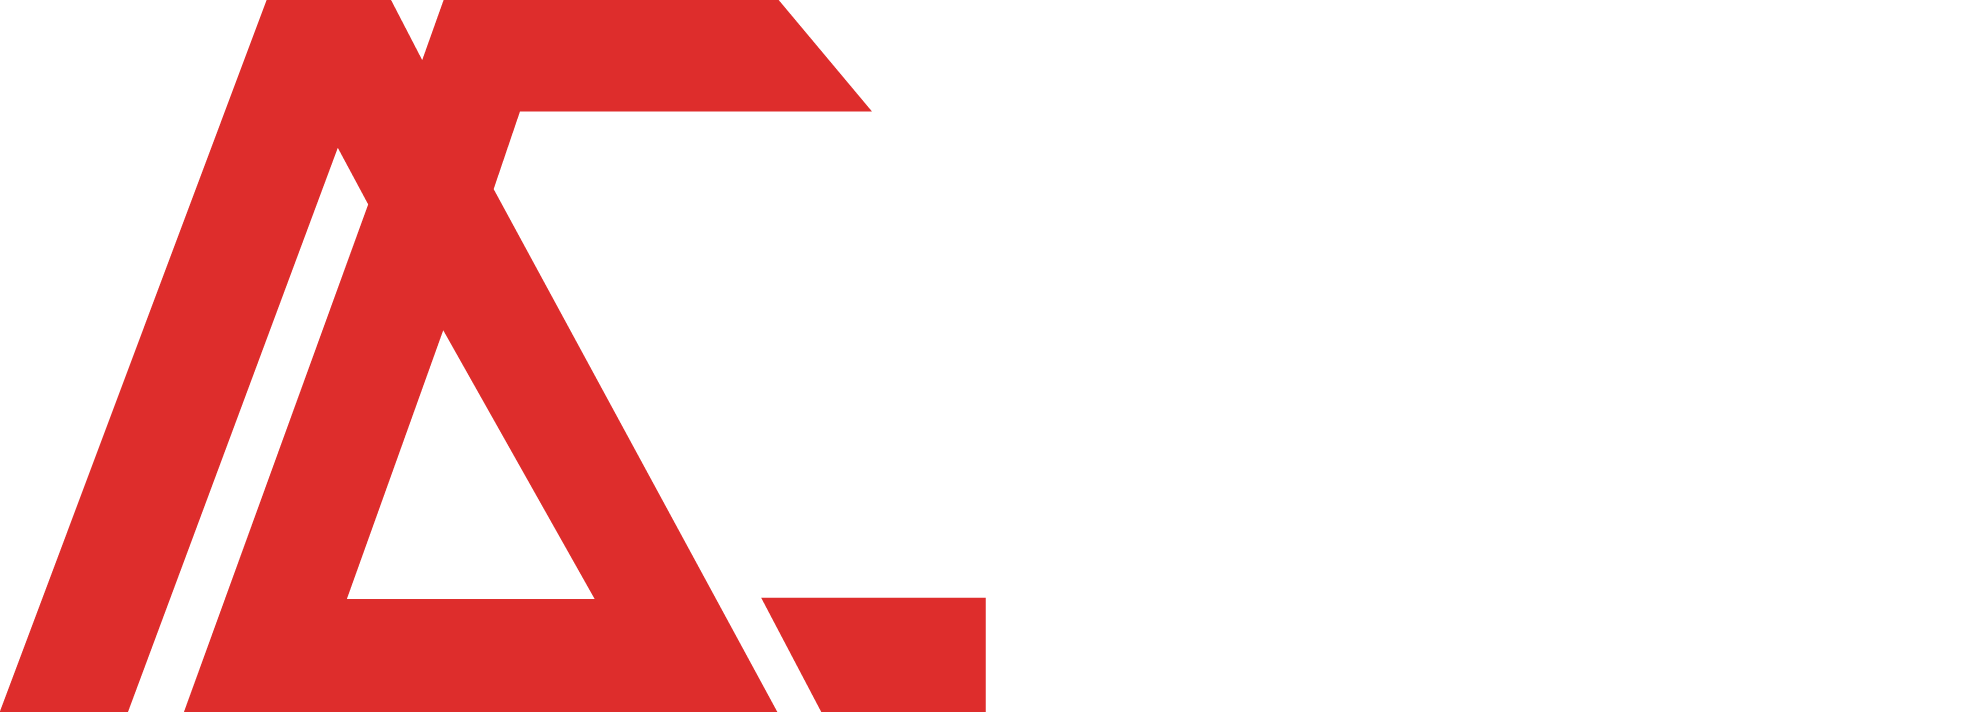 Alpha Container